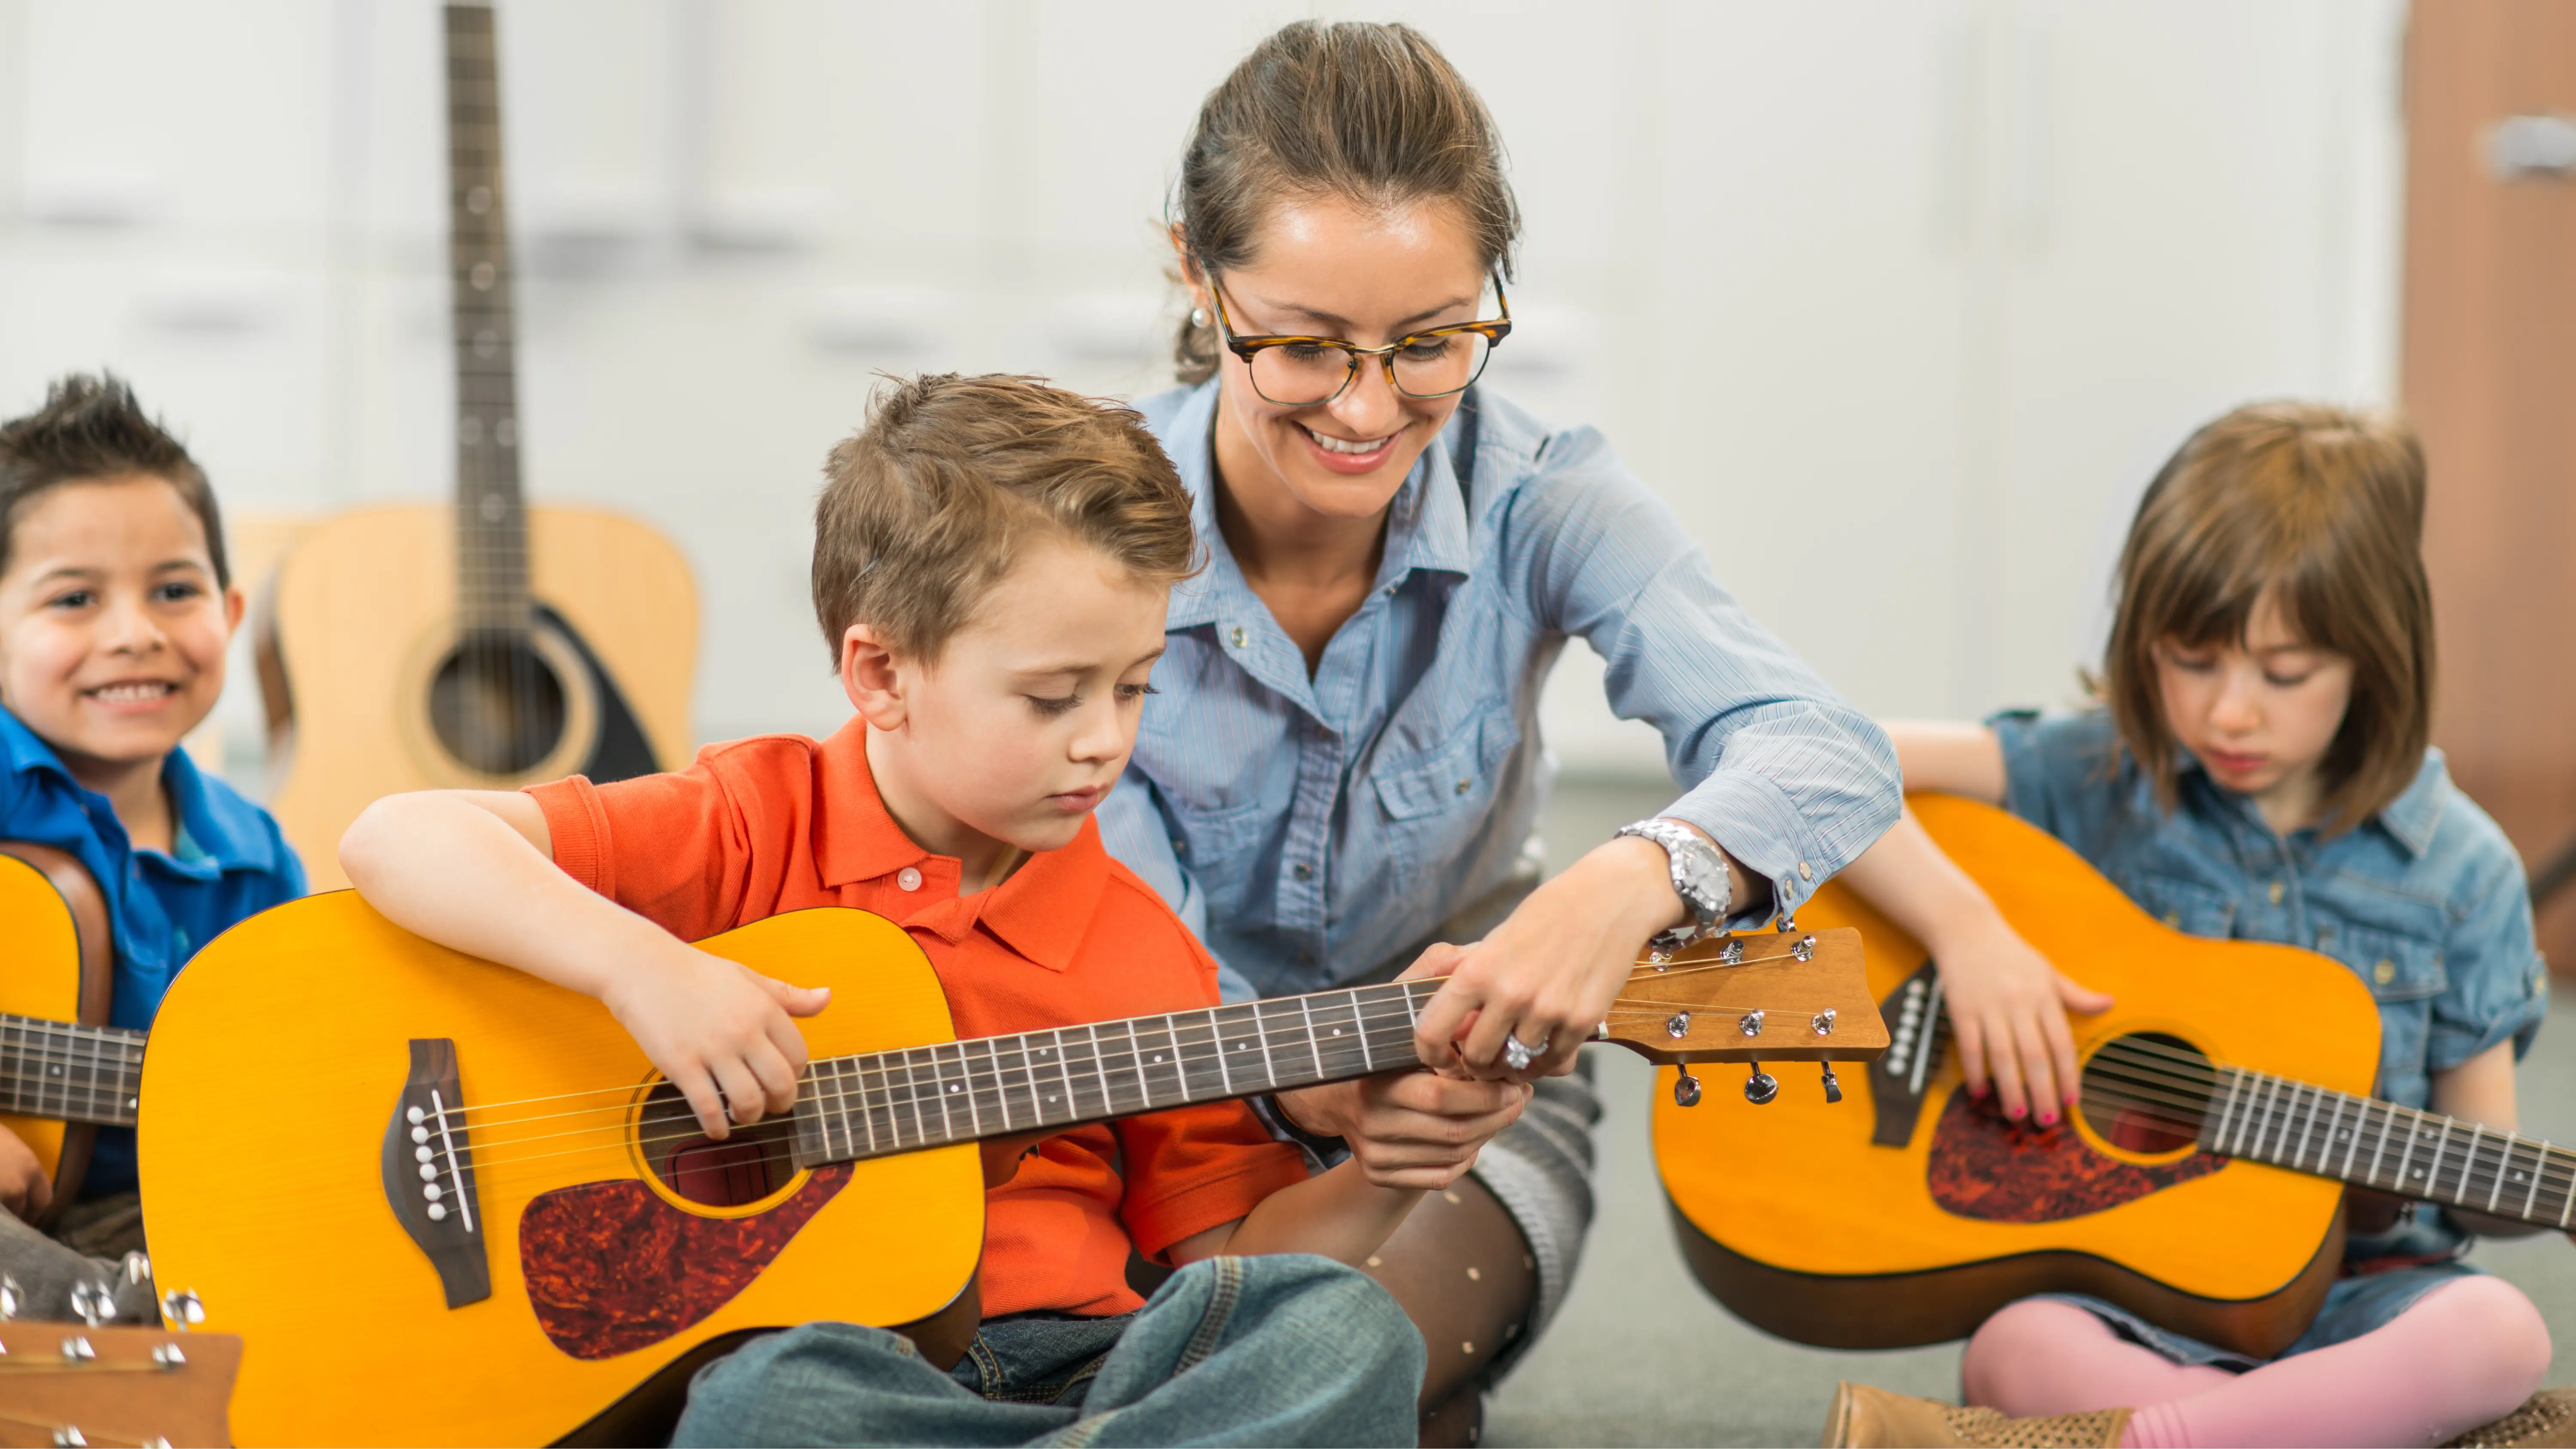 Guitar image for teacher and kid